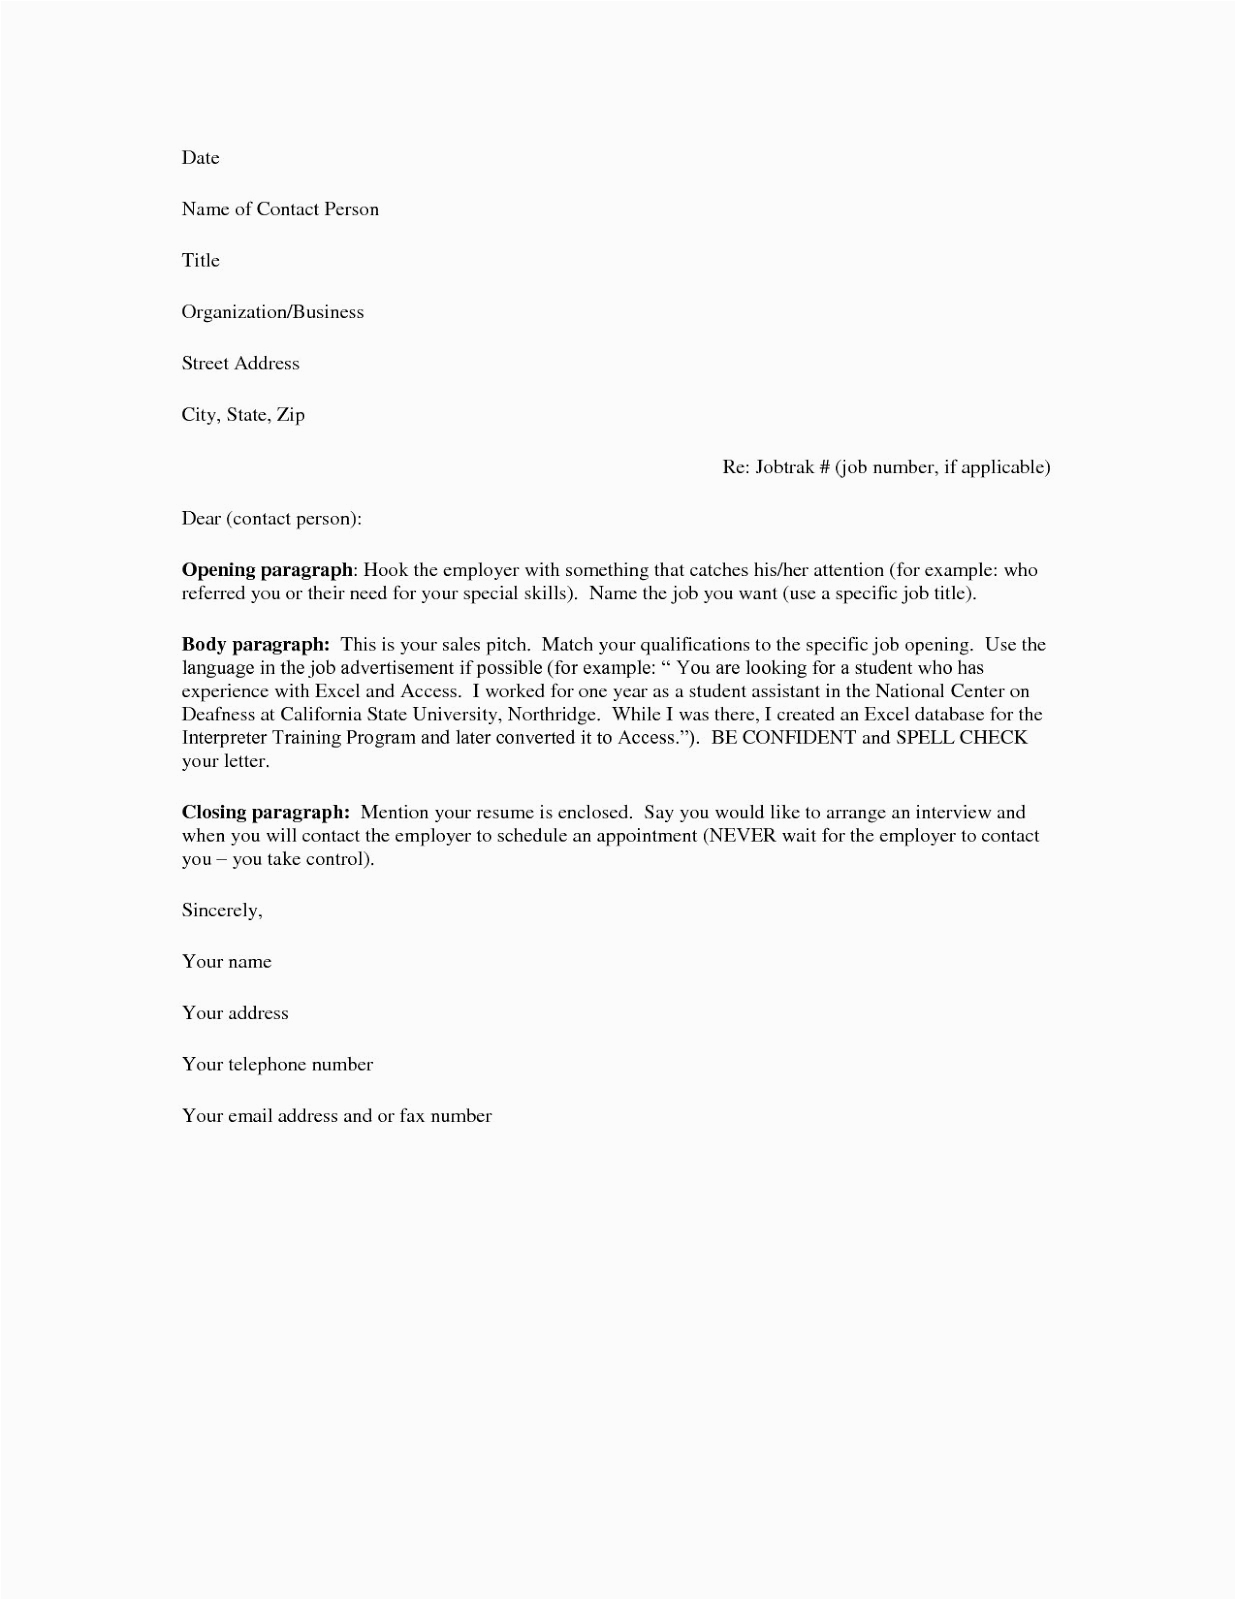 Free Sample Of A Resume Cover Letter Free Cover Letter Samples for Resumes